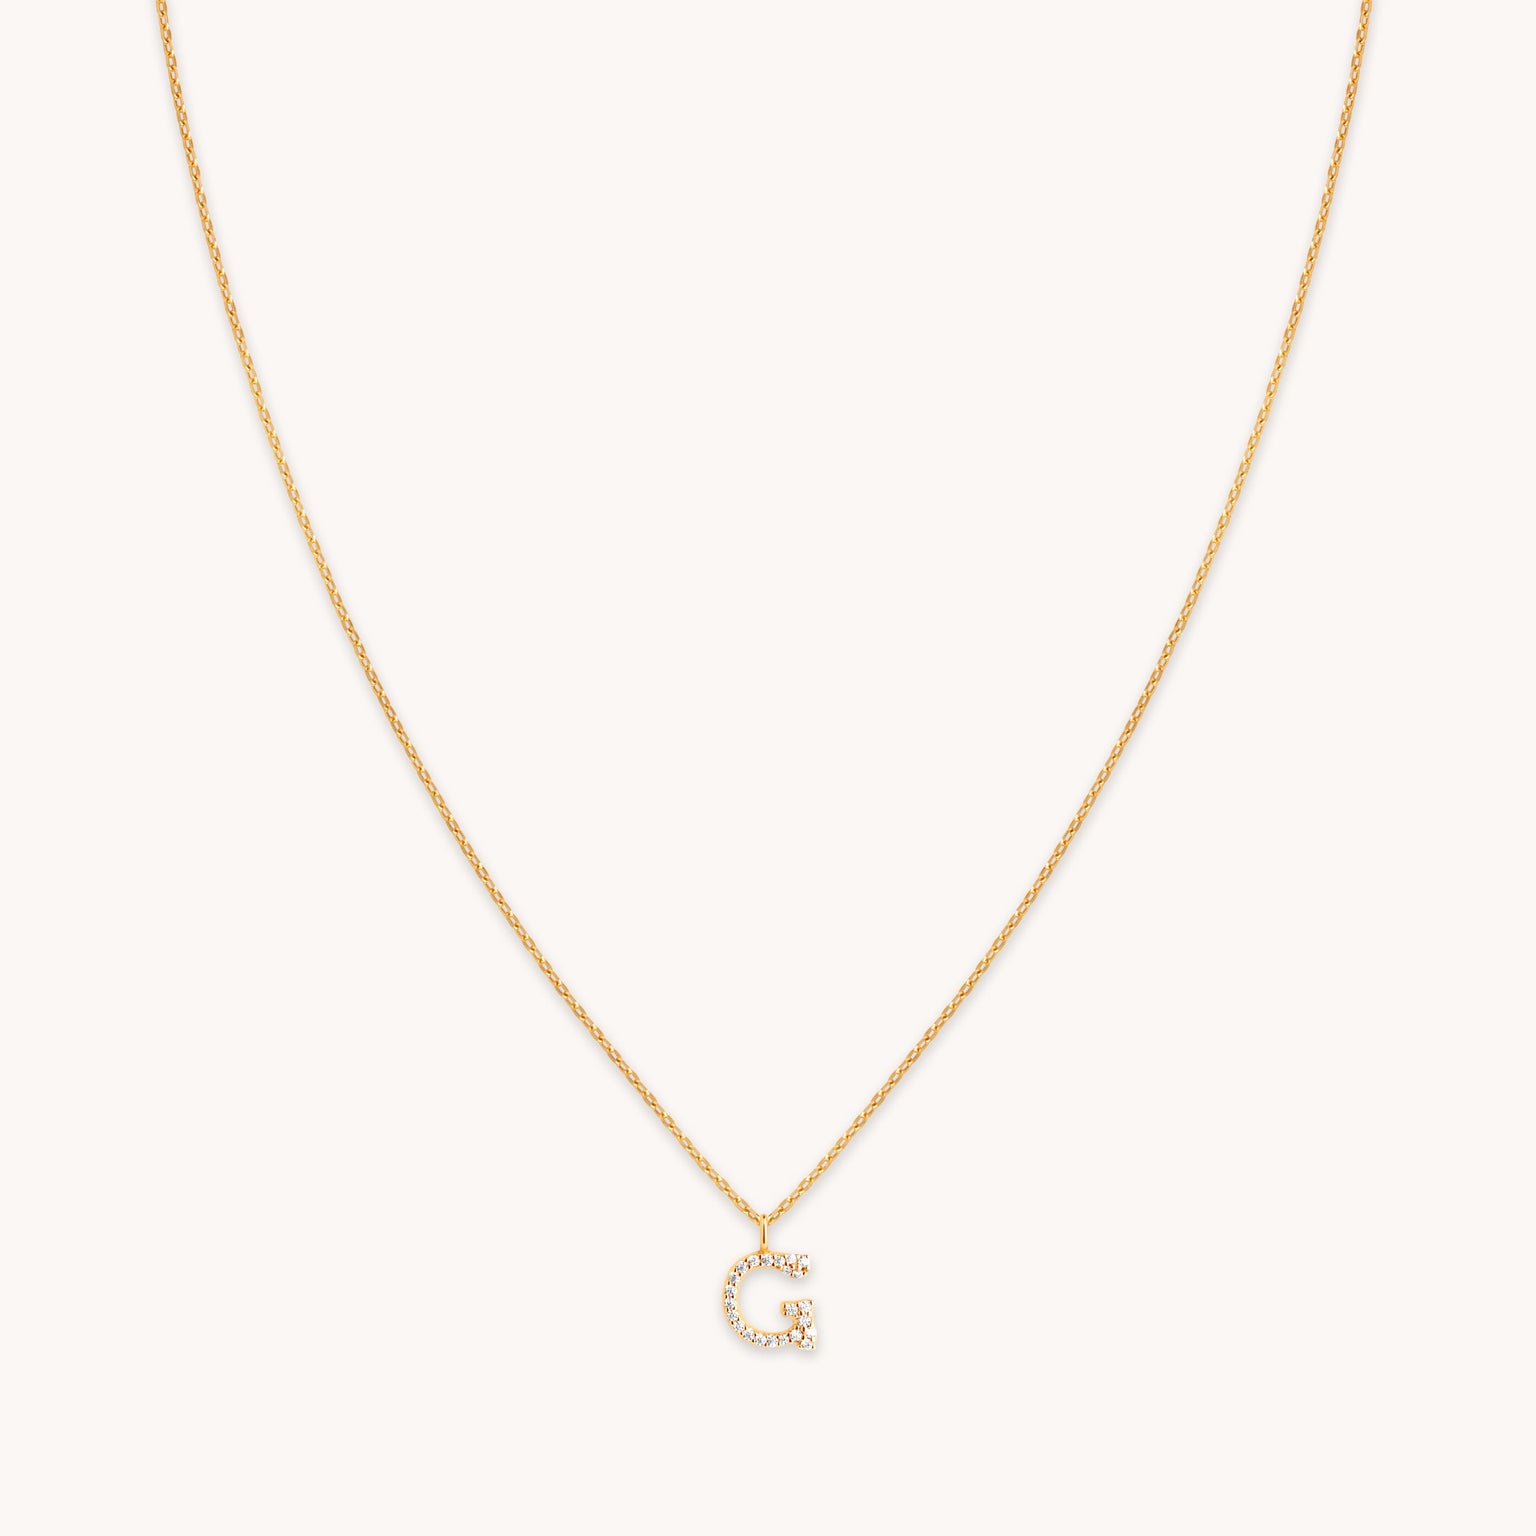 G Initial Pavé Pendant Necklace in Gold